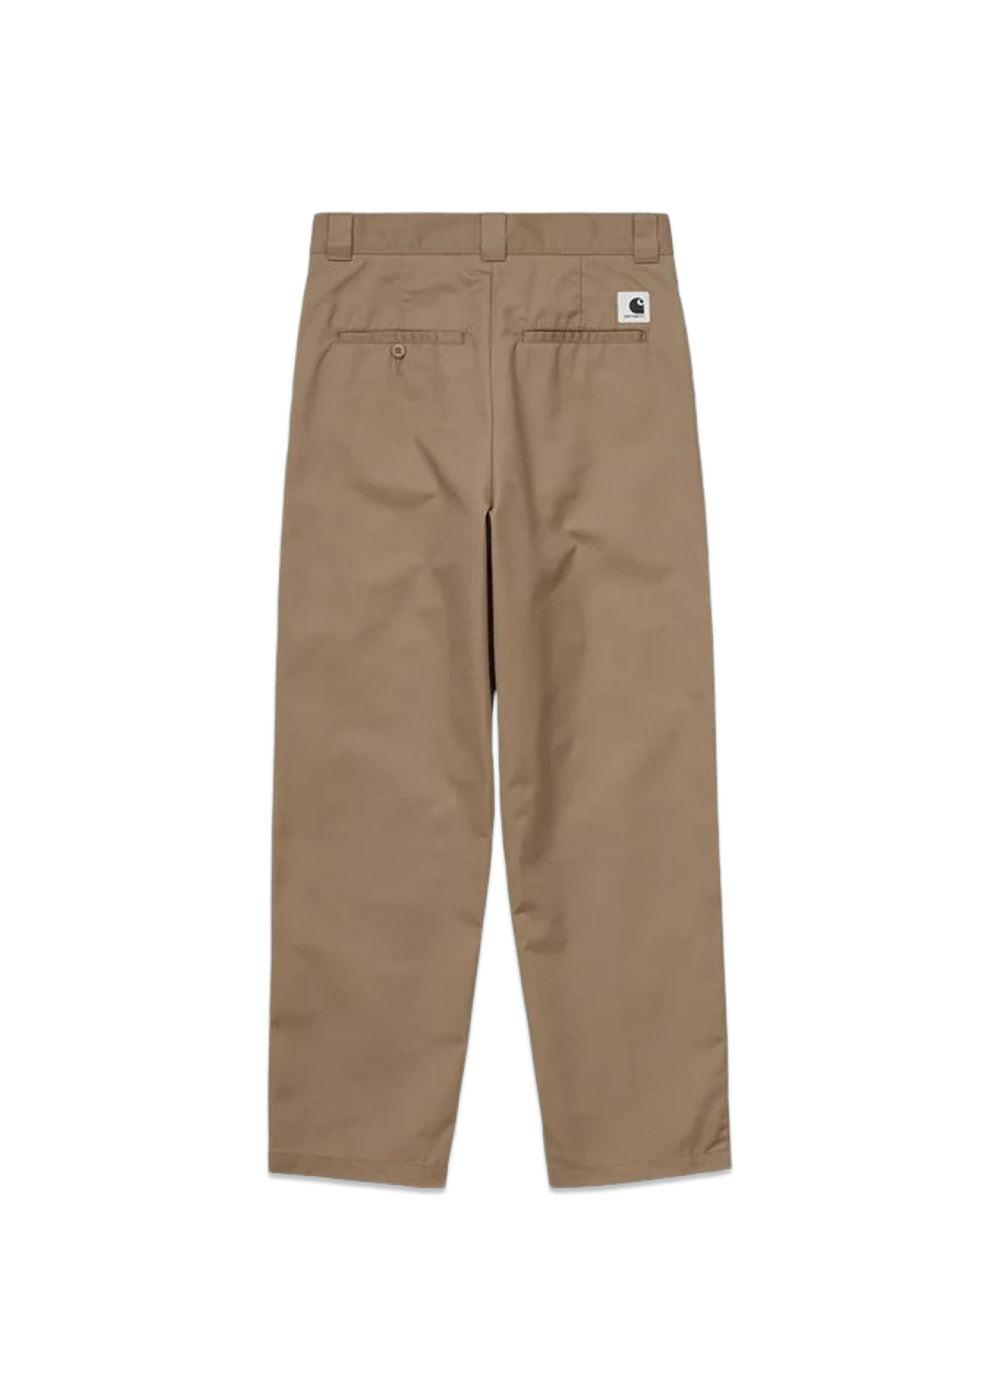 W' Master pant - Dunmore Twill